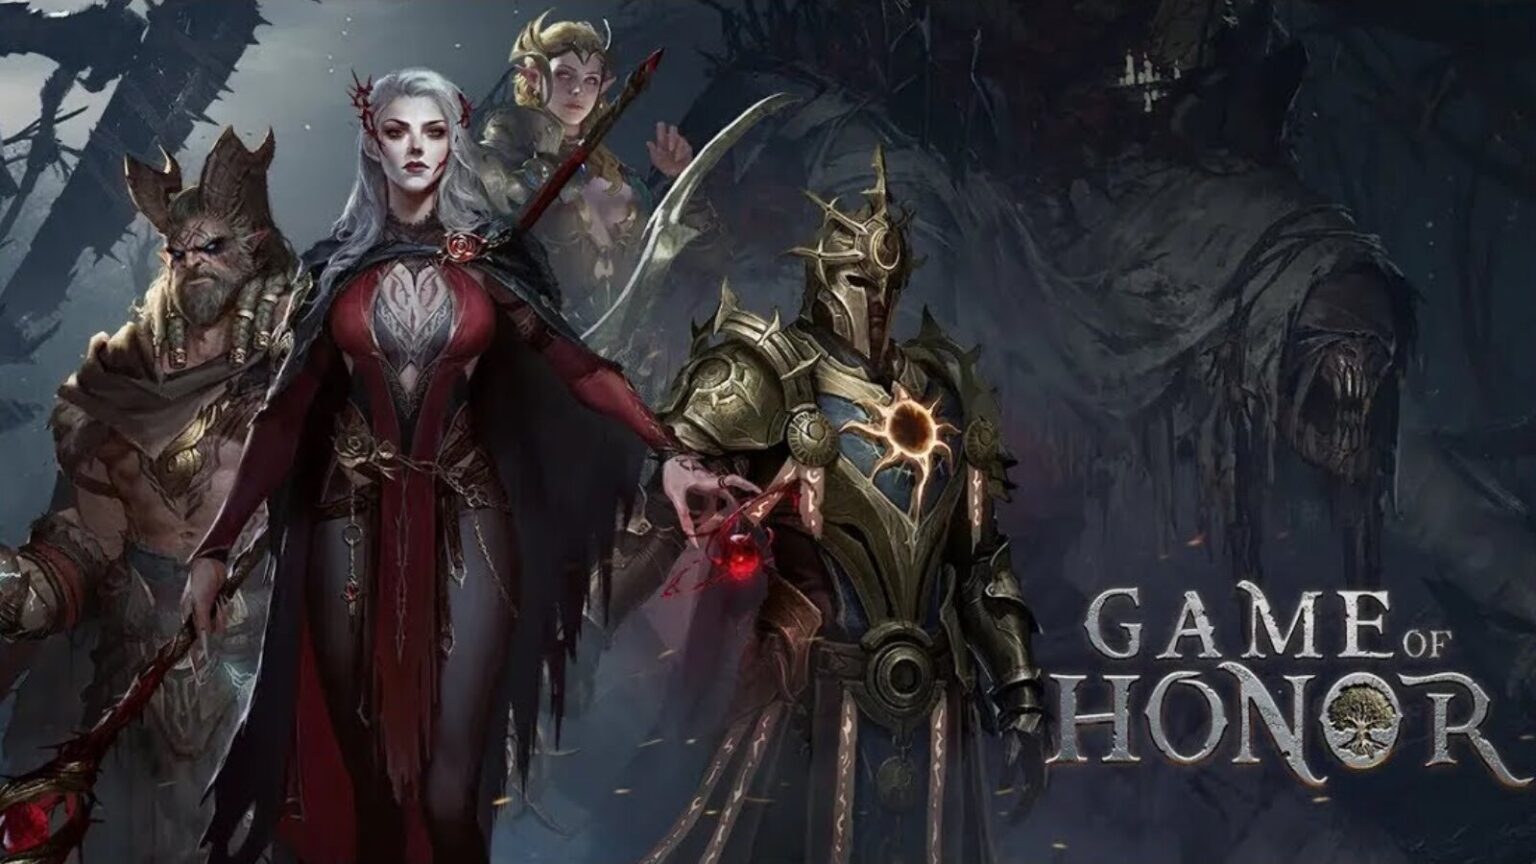 IGG's Game Of Honor Promotional Image Showing Characters From The Game